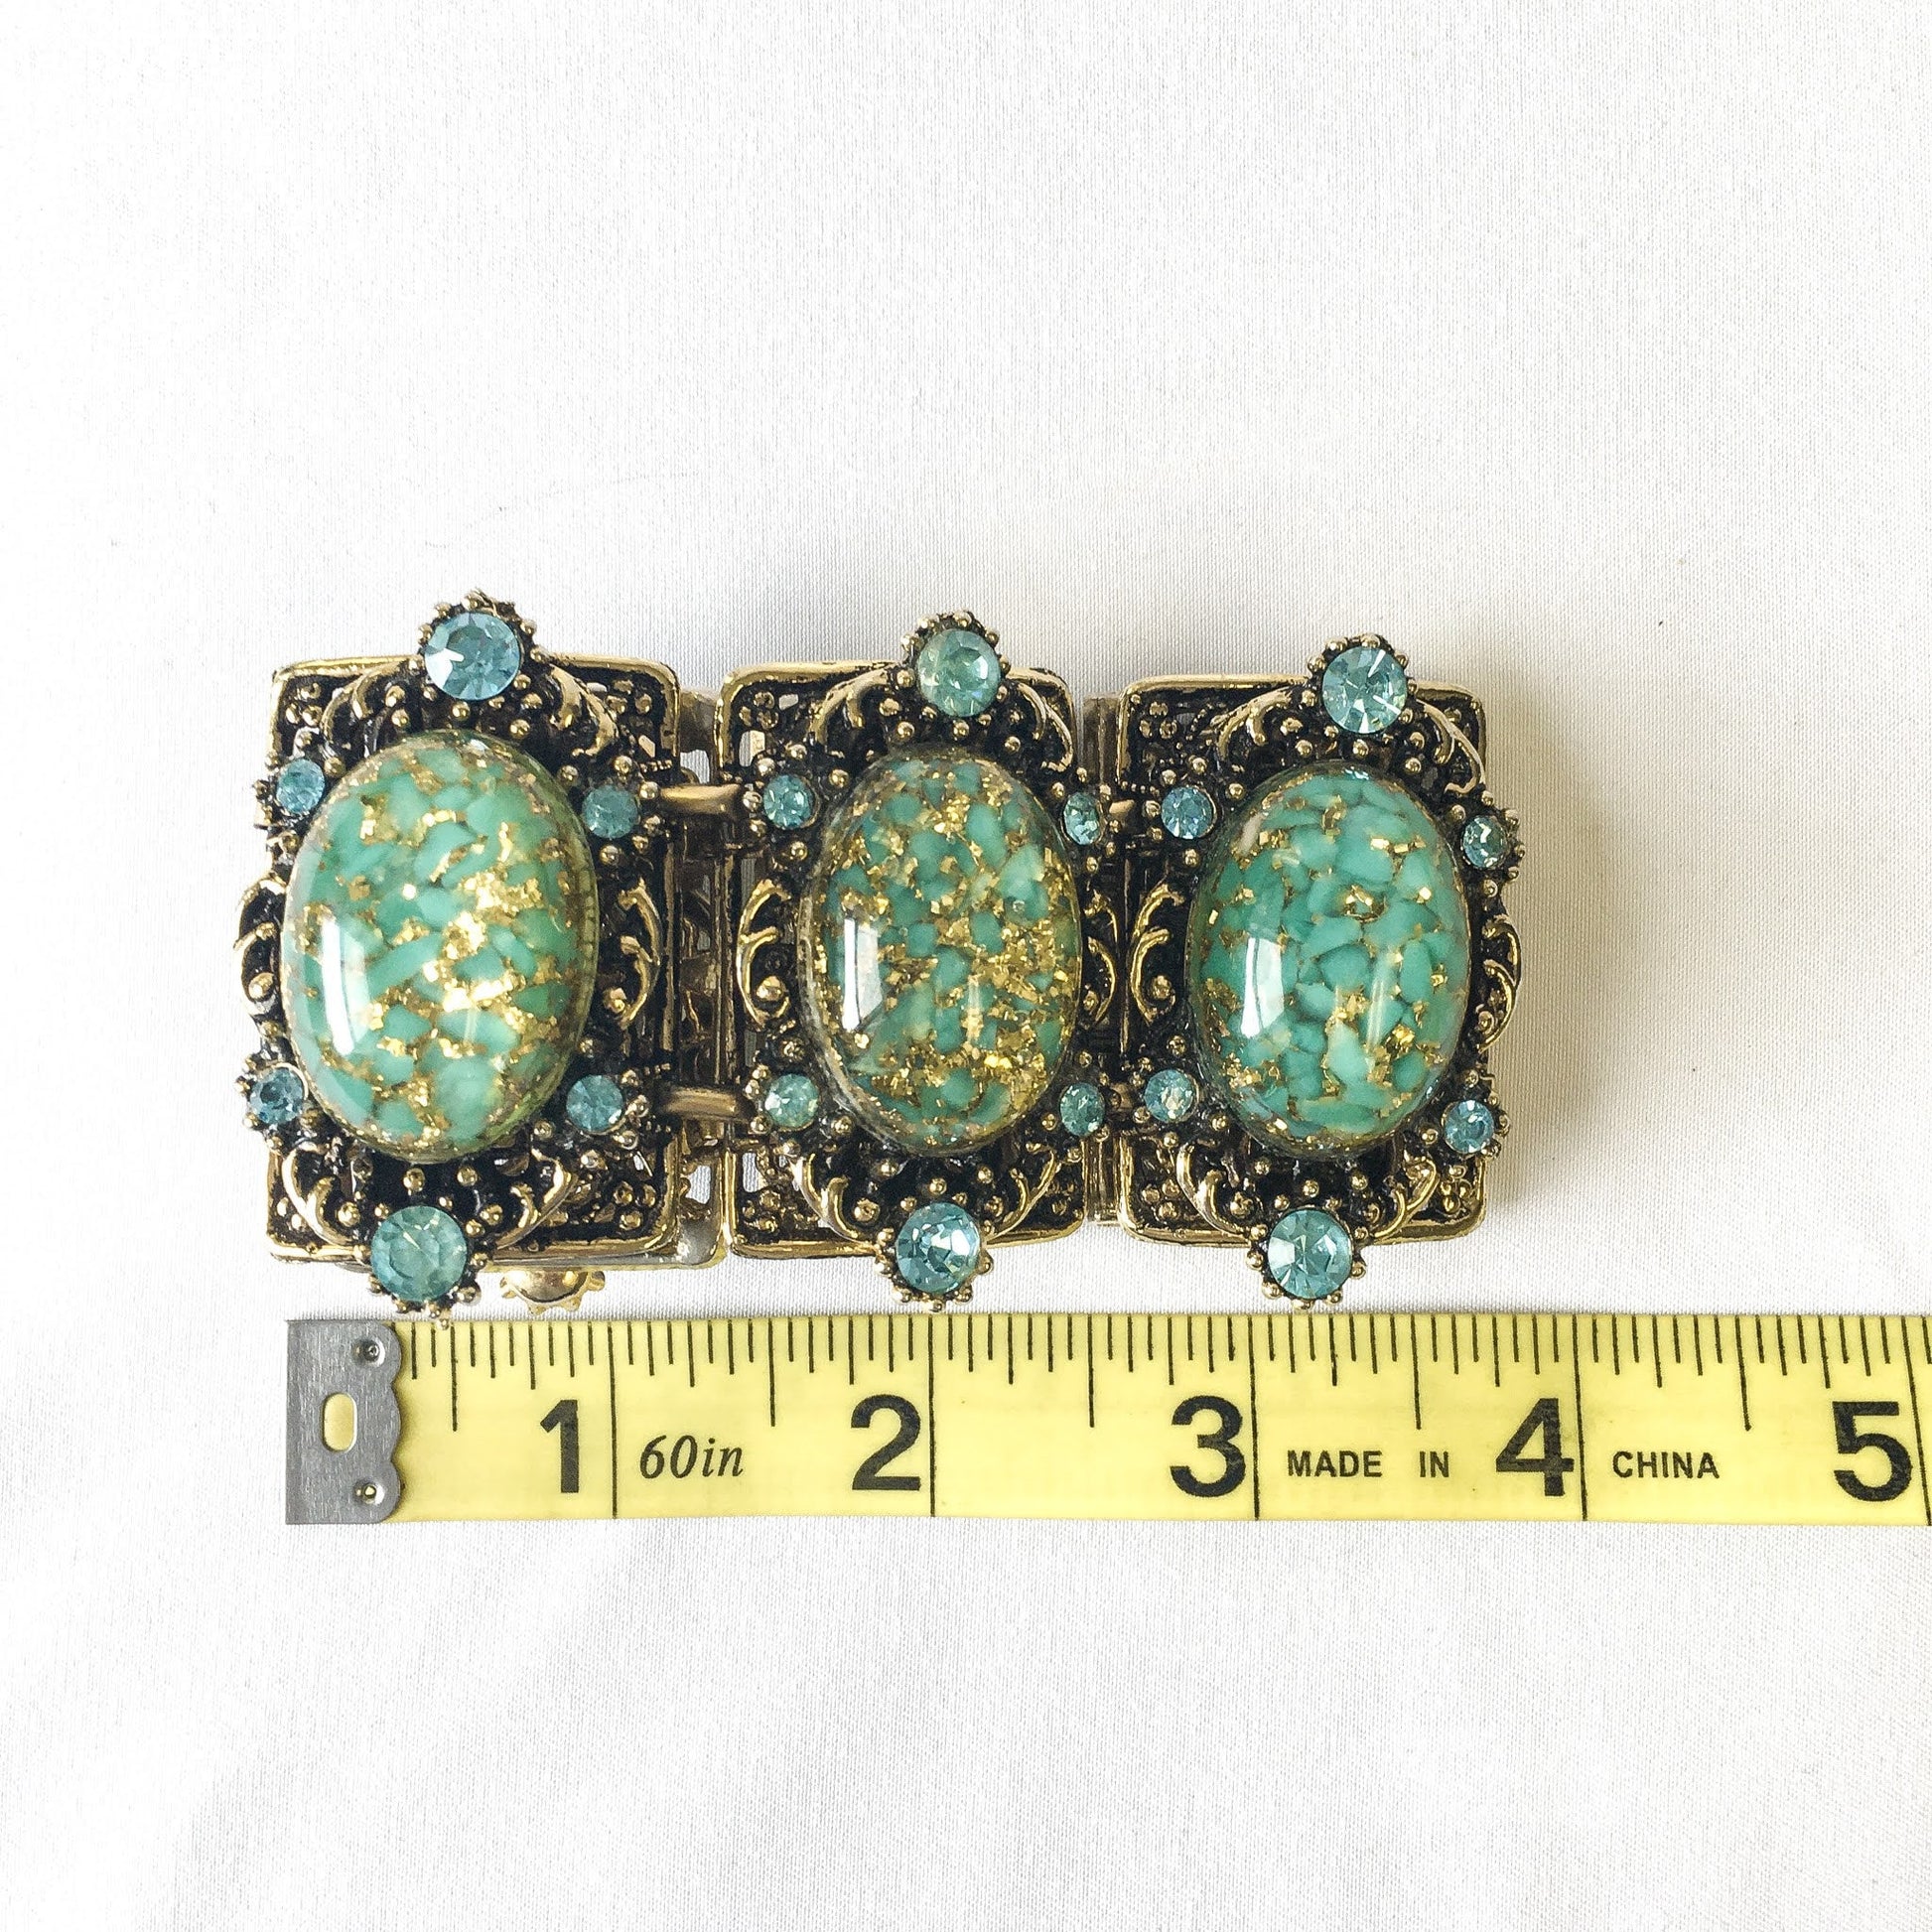 Vintage Victorian Inspired Glass Cabochon Panel Link Bracelet with Blue Rhinestones, Retro Jewelry